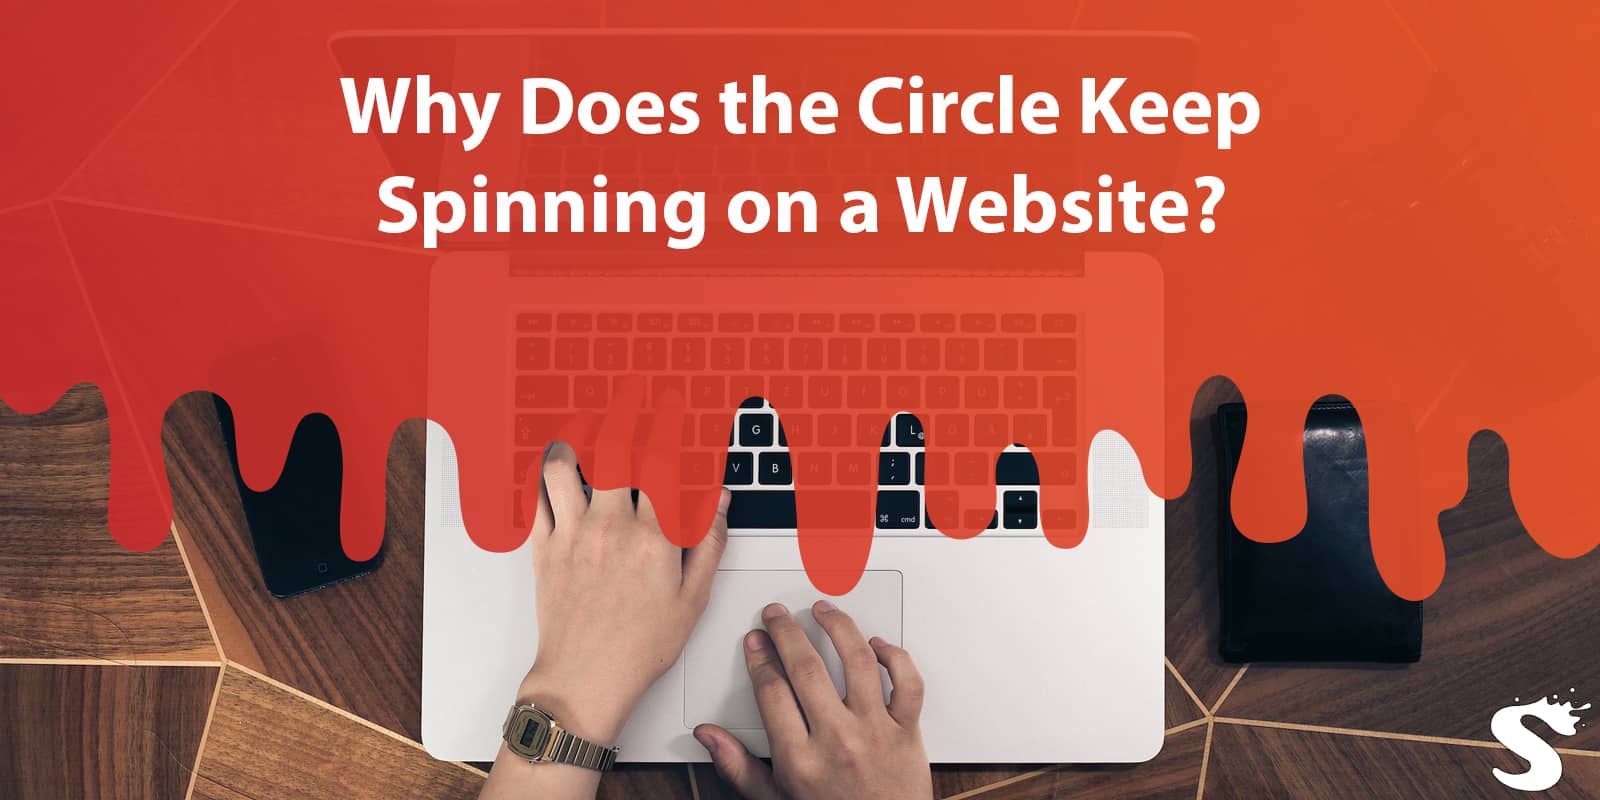 Why Does the Circle Keep Spinning on a Website?